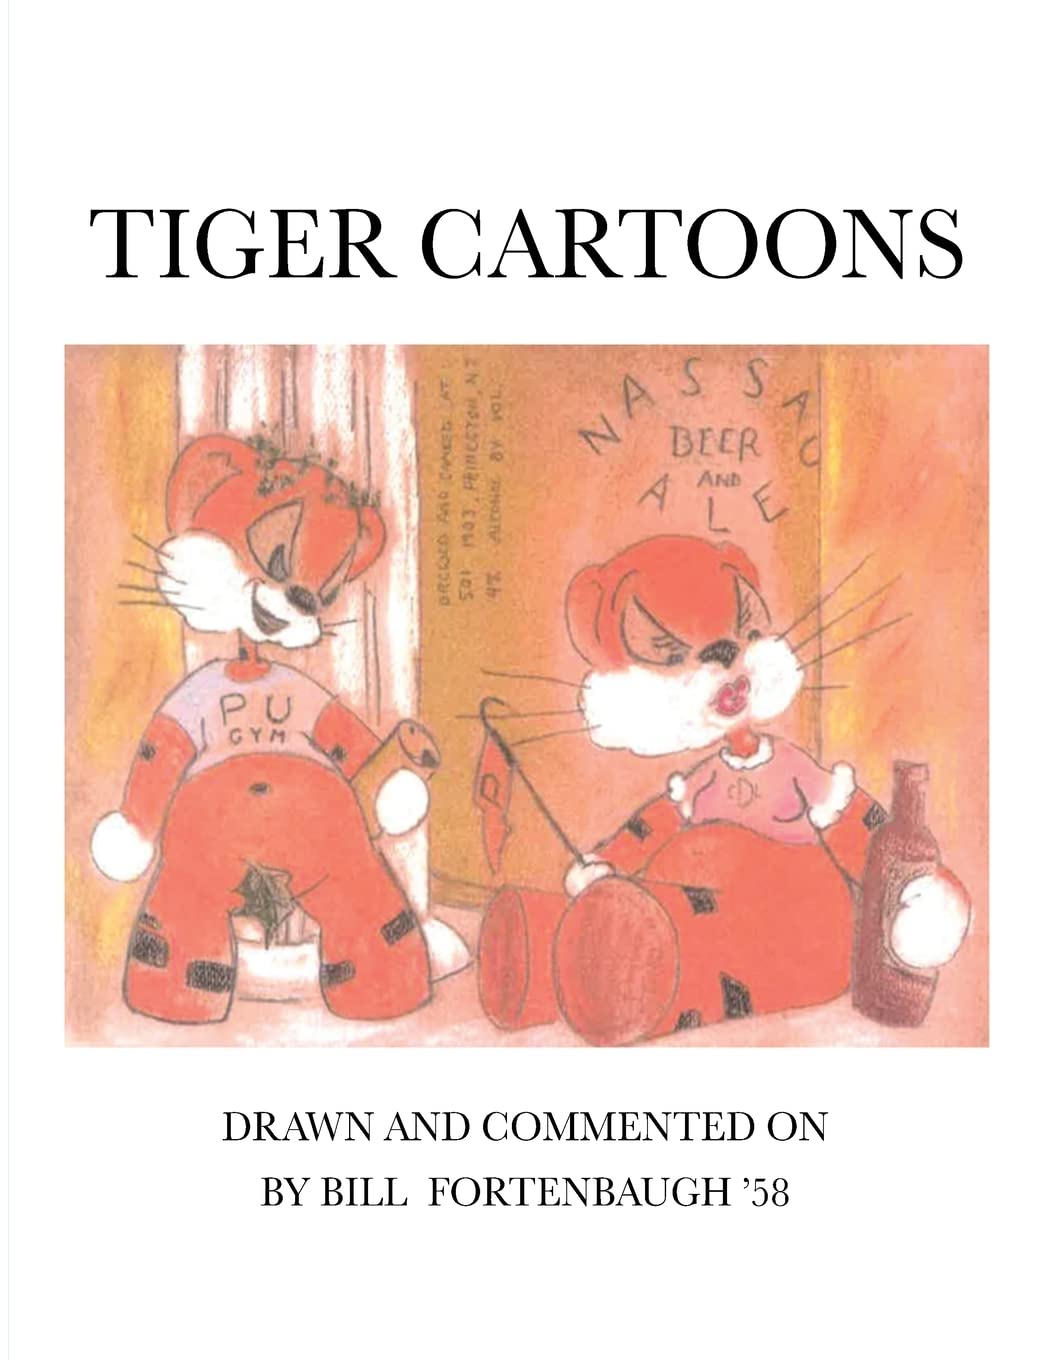 Author's Tranquility Press: Get ready to embark on an exciting adventure into the world of cartoons with author William W. Fortenbaugh and his delightful book, "Tiger Cartoons."